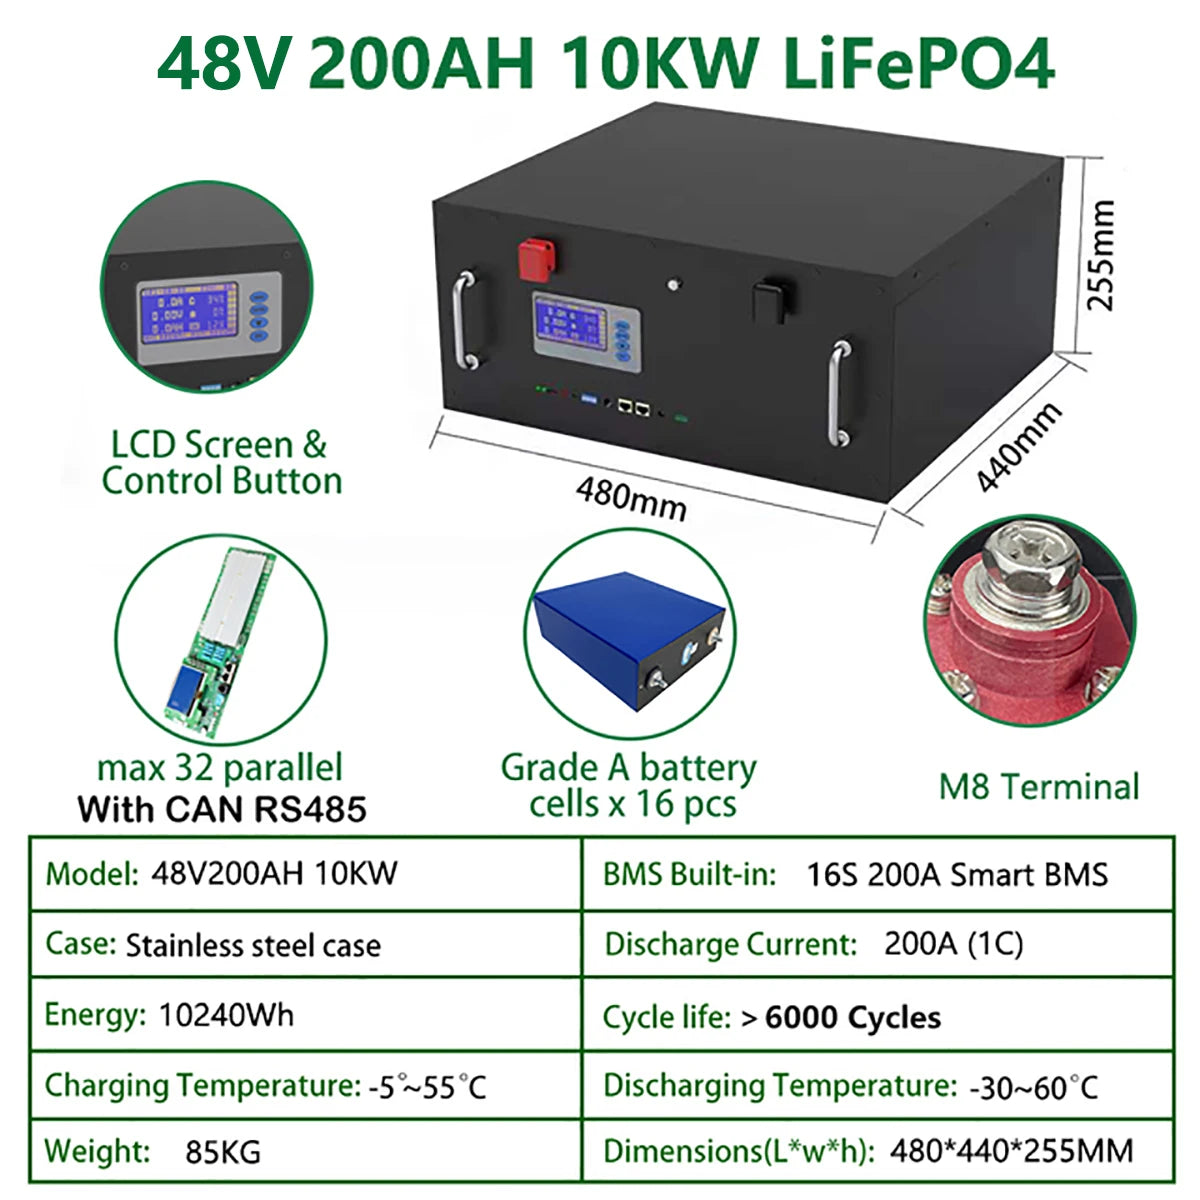 LiFePO4 48V 200AH Battery, High-performance LiFePO4 battery pack with built-in BMS for solar applications, offering long lifespan and tax-free benefits.